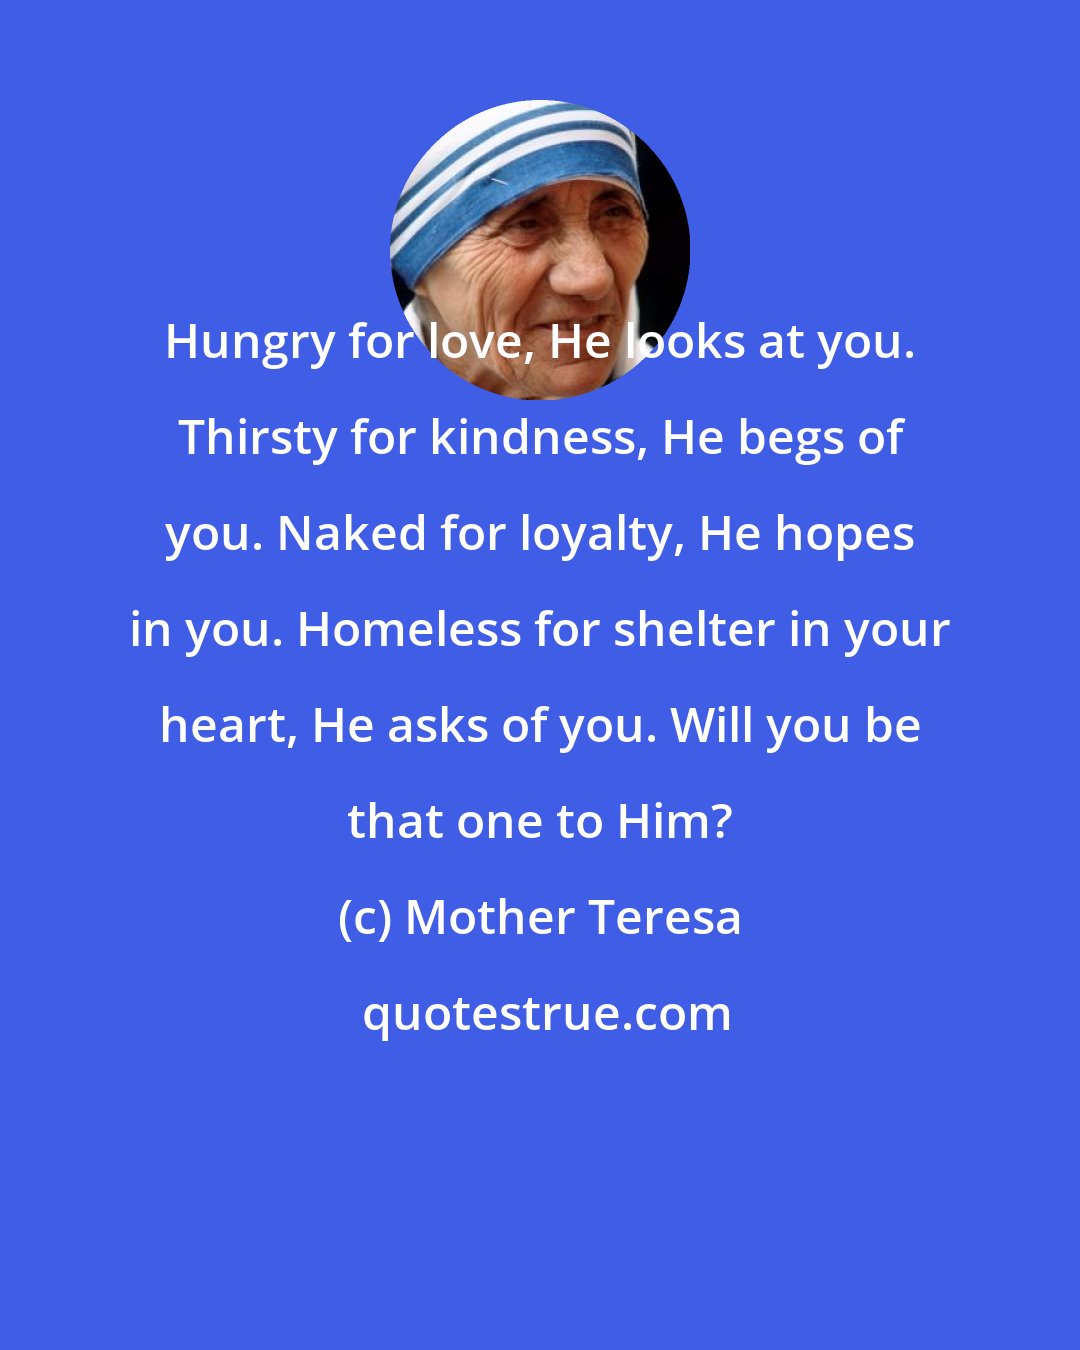 Mother Teresa: Hungry for love, He looks at you. Thirsty for kindness, He begs of you. Naked for loyalty, He hopes in you. Homeless for shelter in your heart, He asks of you. Will you be that one to Him?